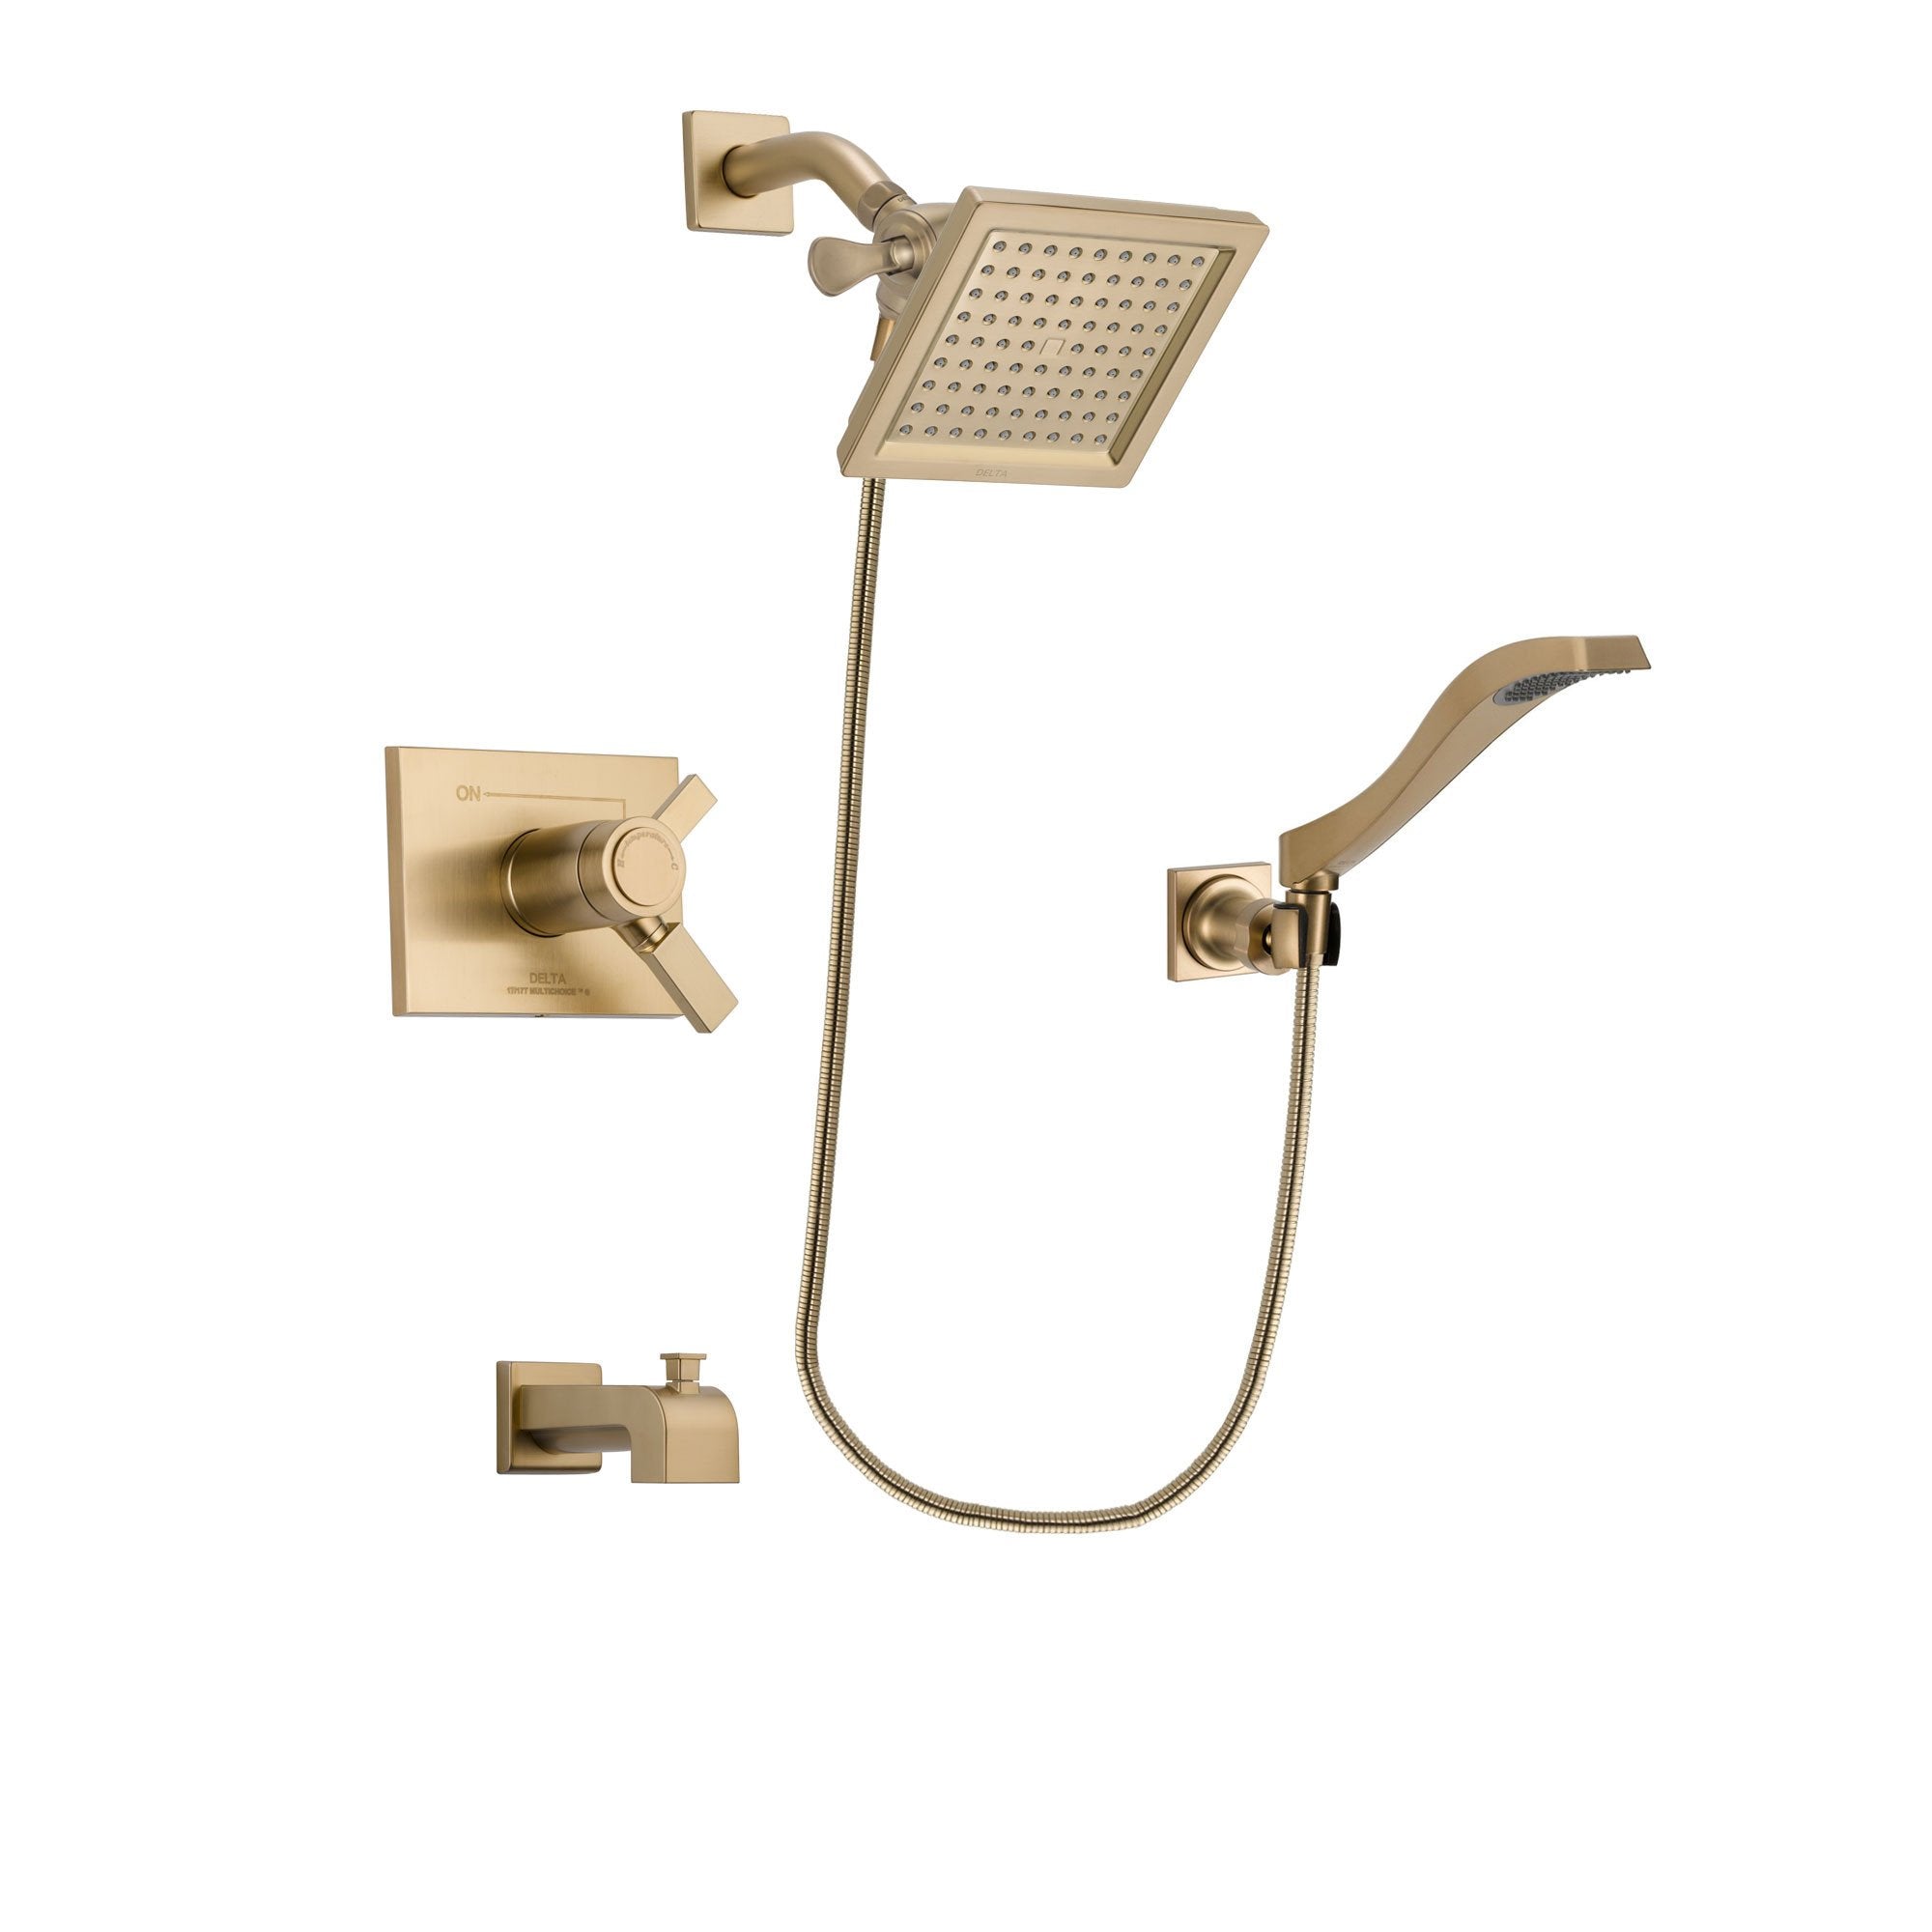 Delta Vero Champagne Bronze Finish Thermostatic Tub and Shower Faucet System Package with 6.5-inch Square Rain Showerhead and Modern Wall Mount Handheld Shower Spray Includes Rough-in Valve and Tub Spout DSP3851V